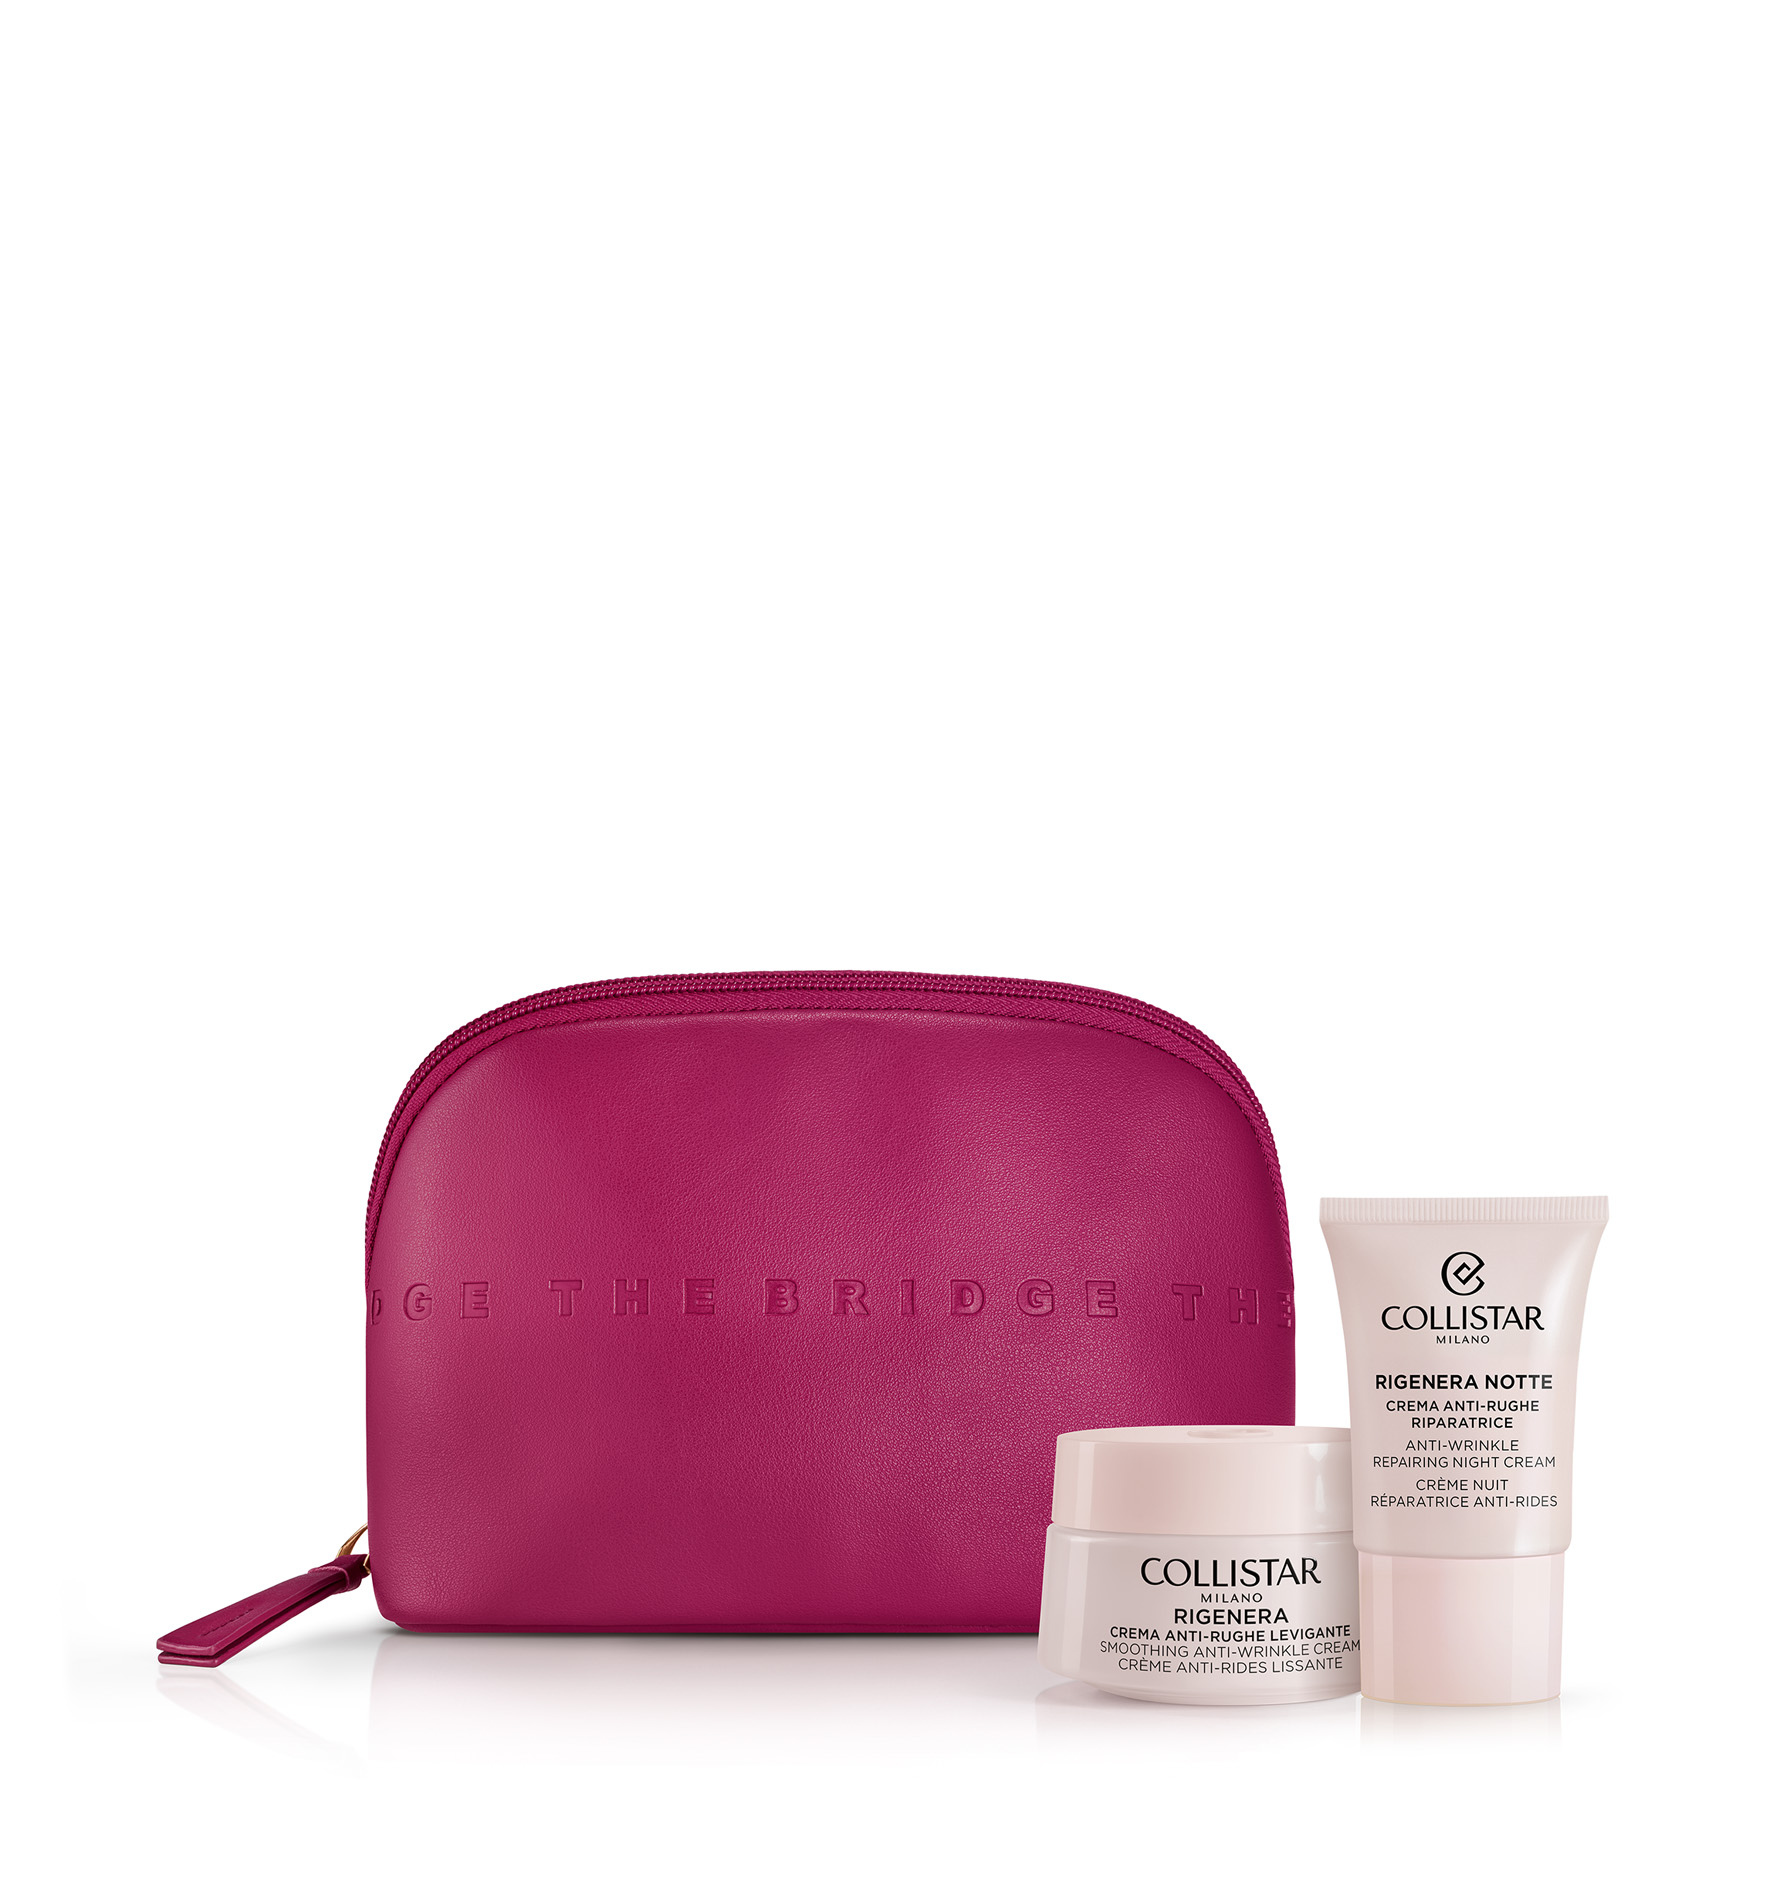 RIGENERA SMOOTHING ANTI-WRINKLE CREAM FACE AND NECK GIFT SET - Giftsets | Collistar - Shop Online Ufficiale